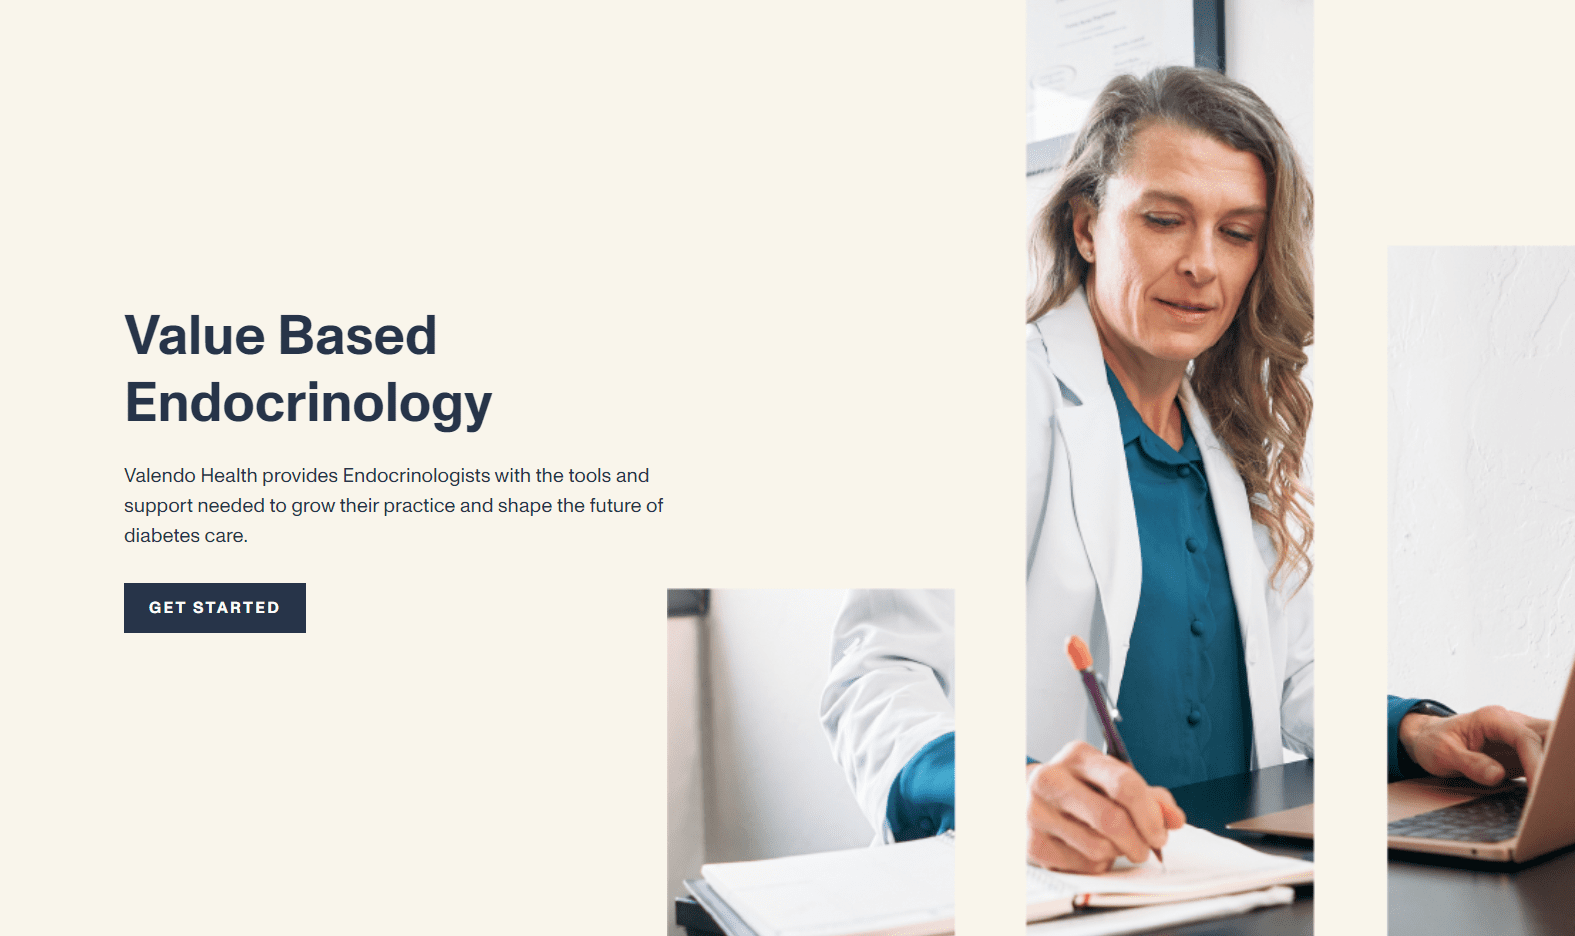 Valendo Health Launches with $4M for Value-Based Endocrinology to Improve Diabetes Care